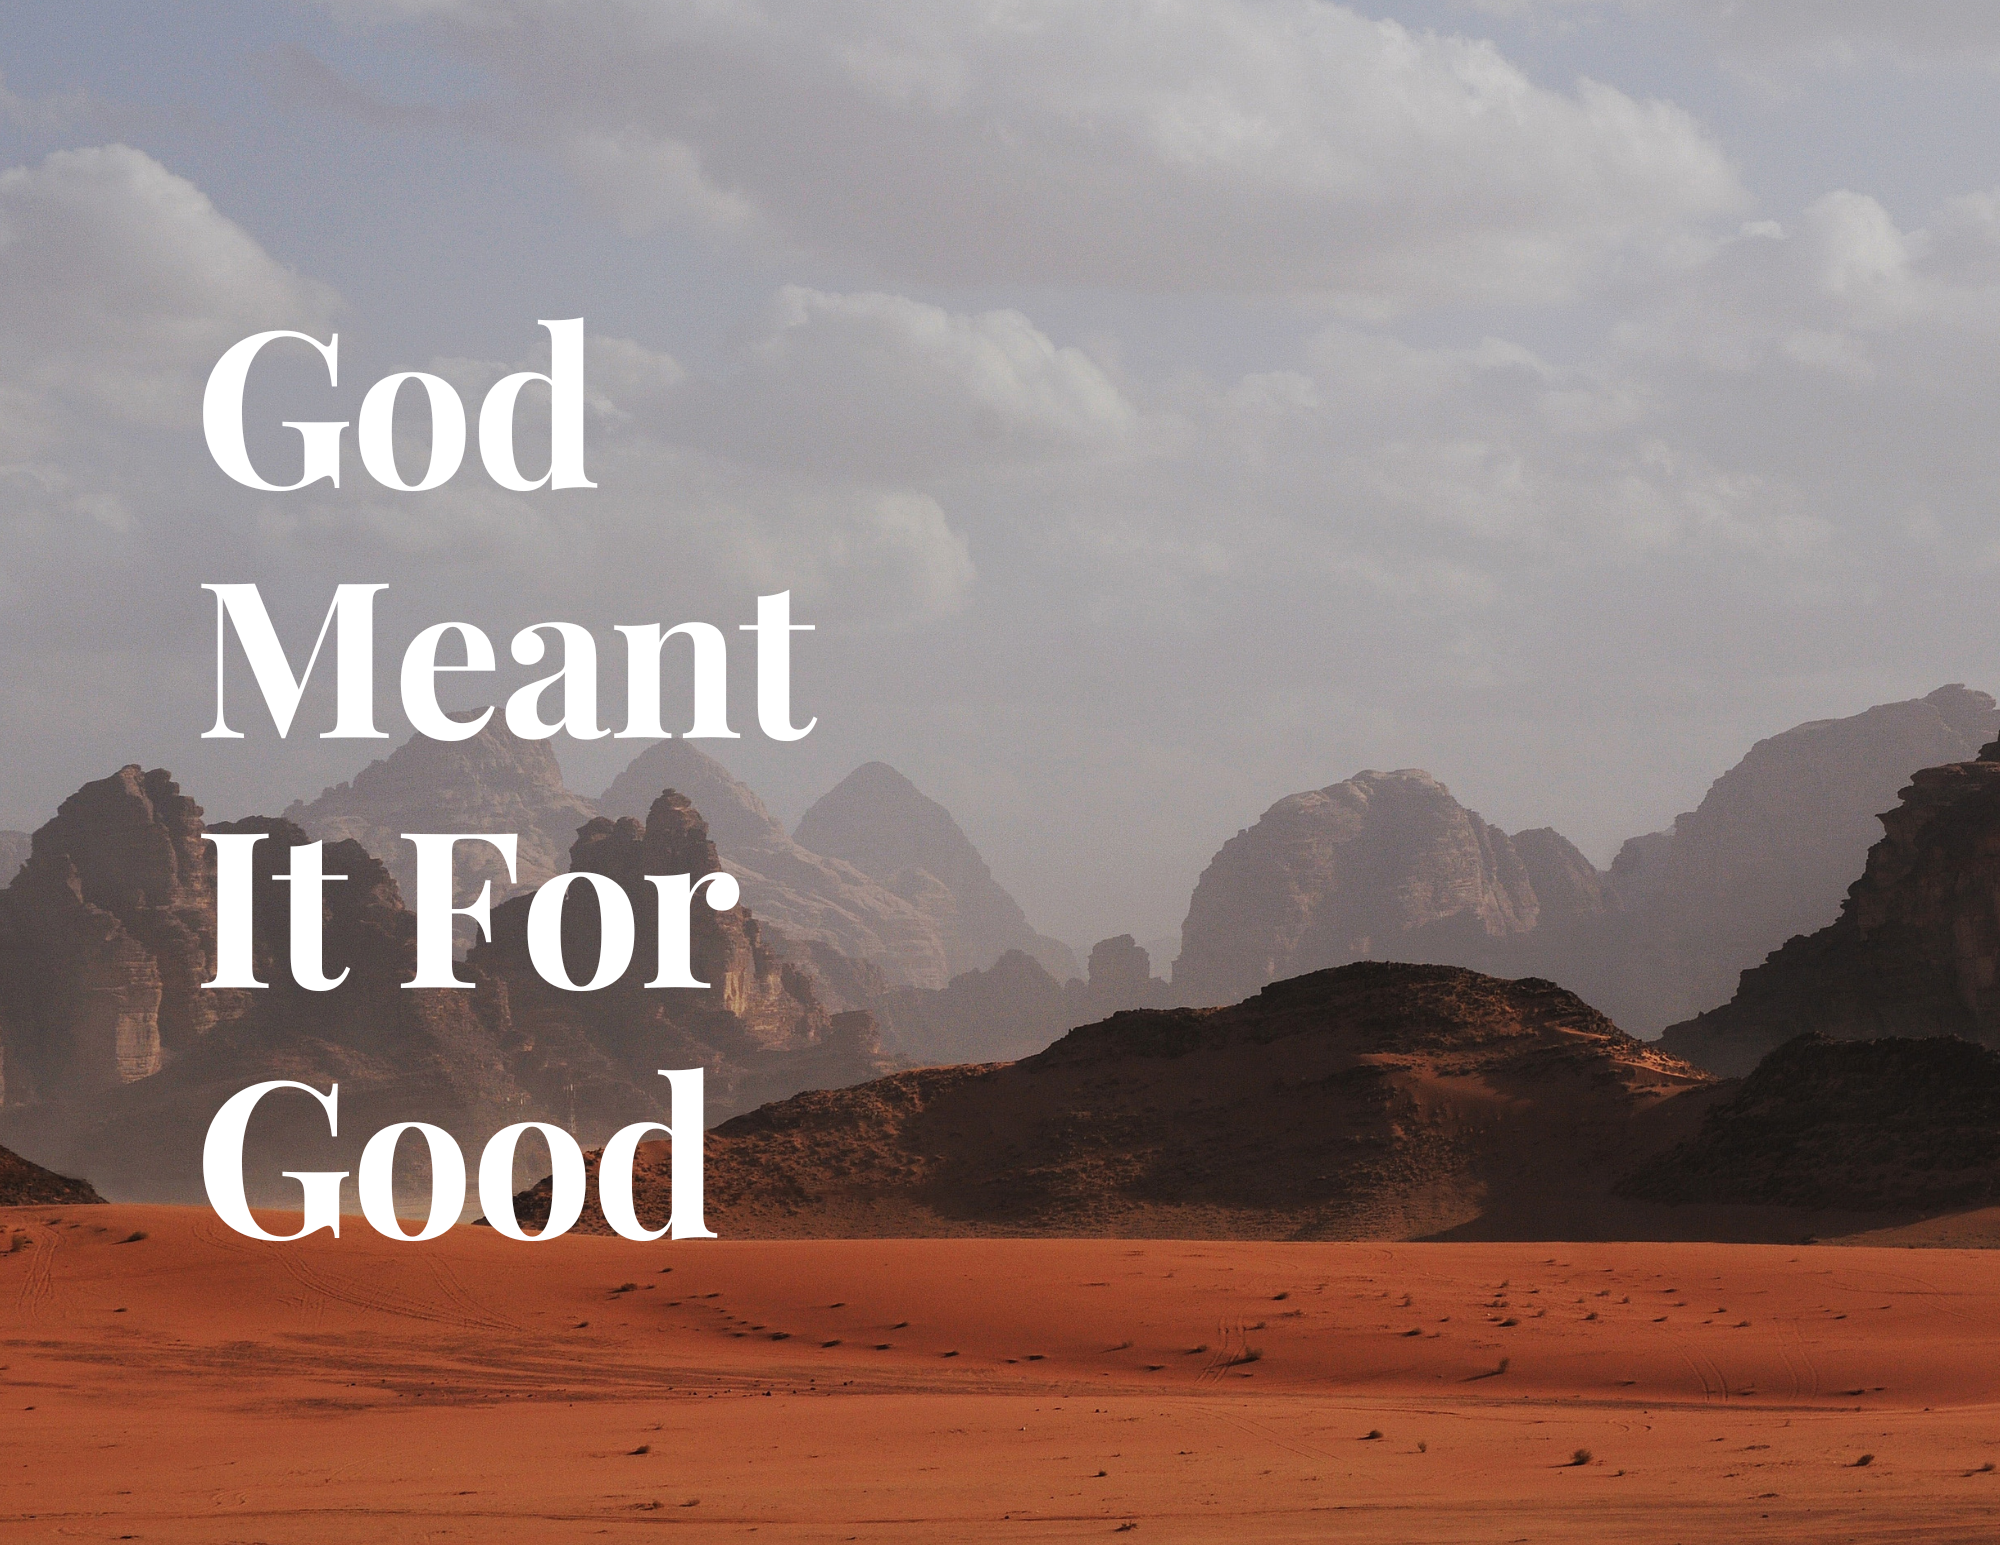 God Meant It For Good banner